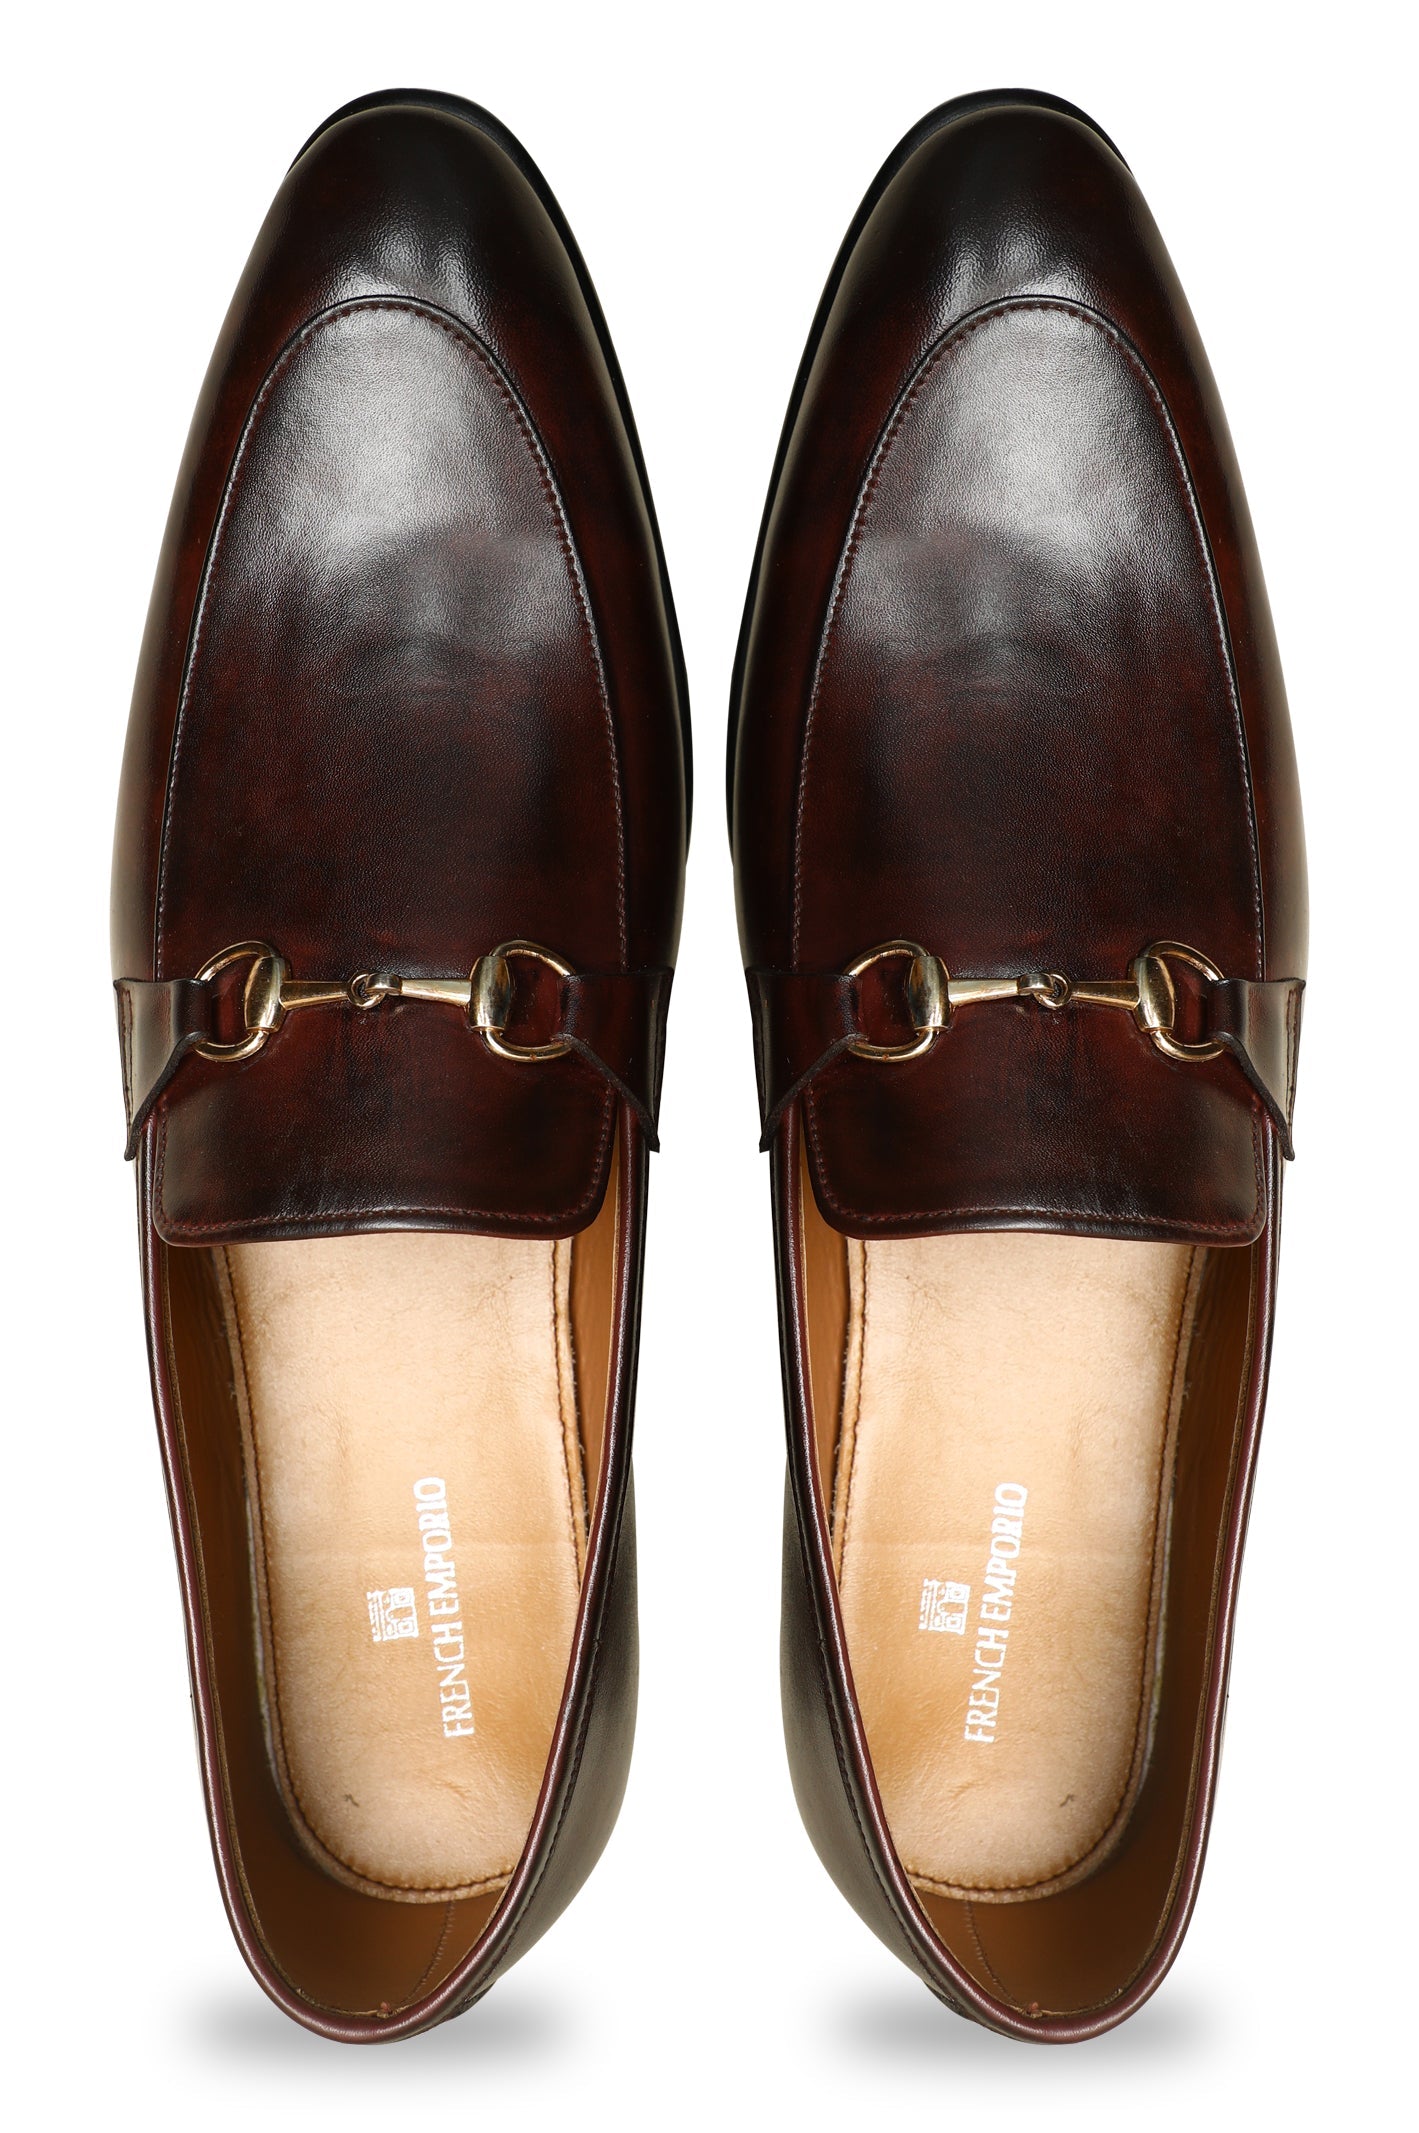 Formal Shoes For Men in Coffee: SMF-0145-COFFEE - Diners